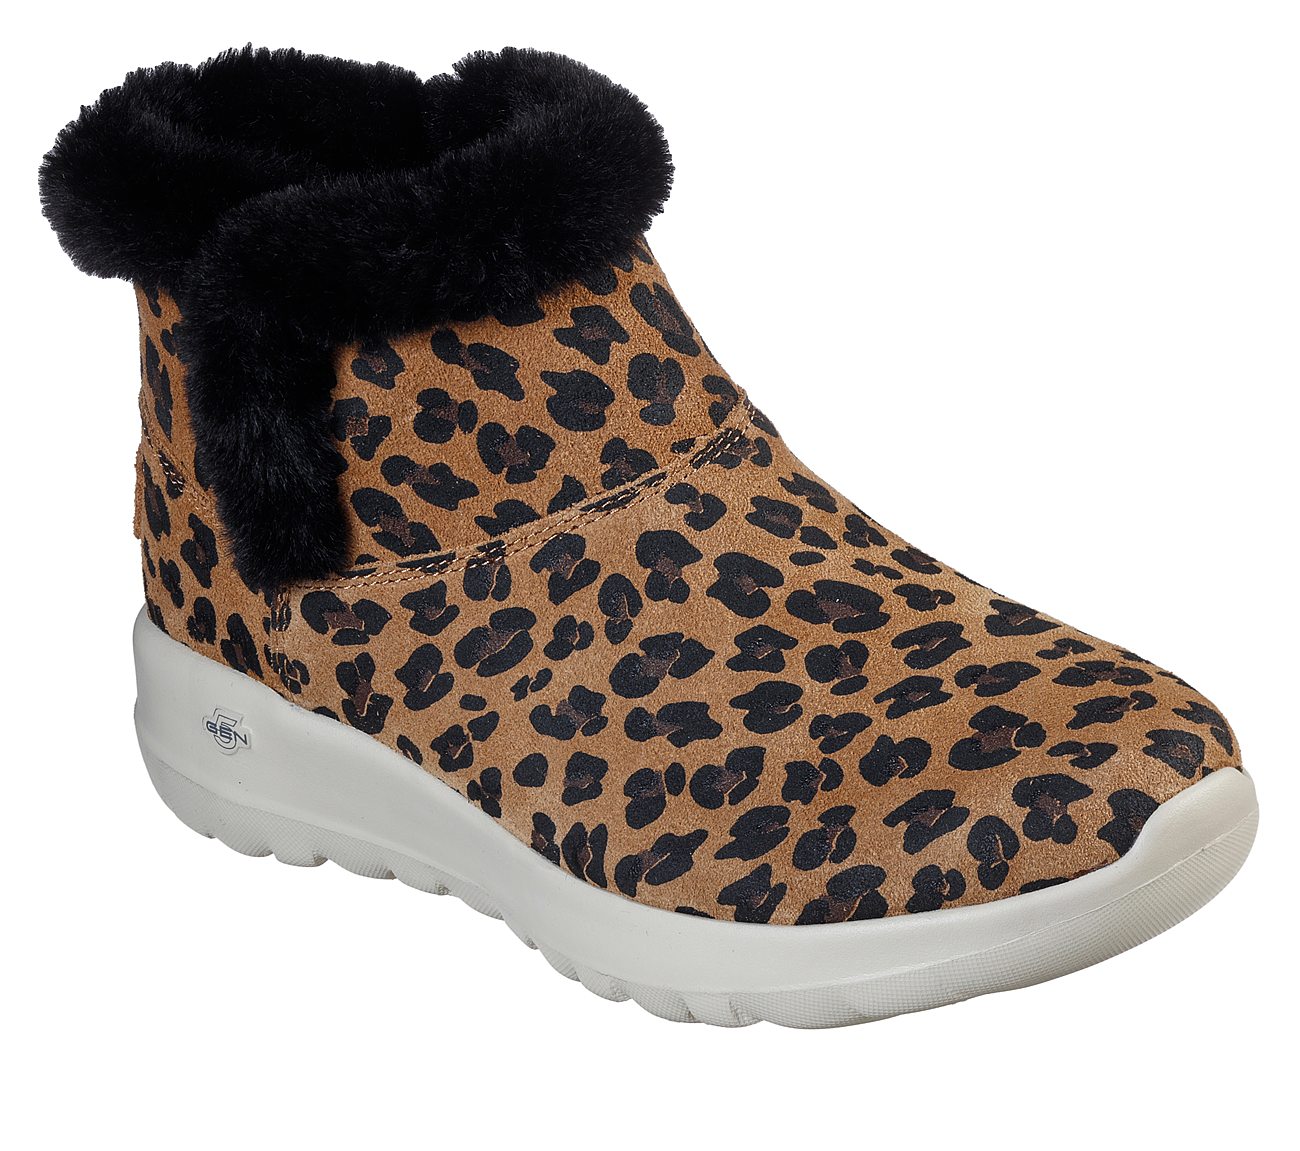 Snow Kitty Skechers Performance Shoes